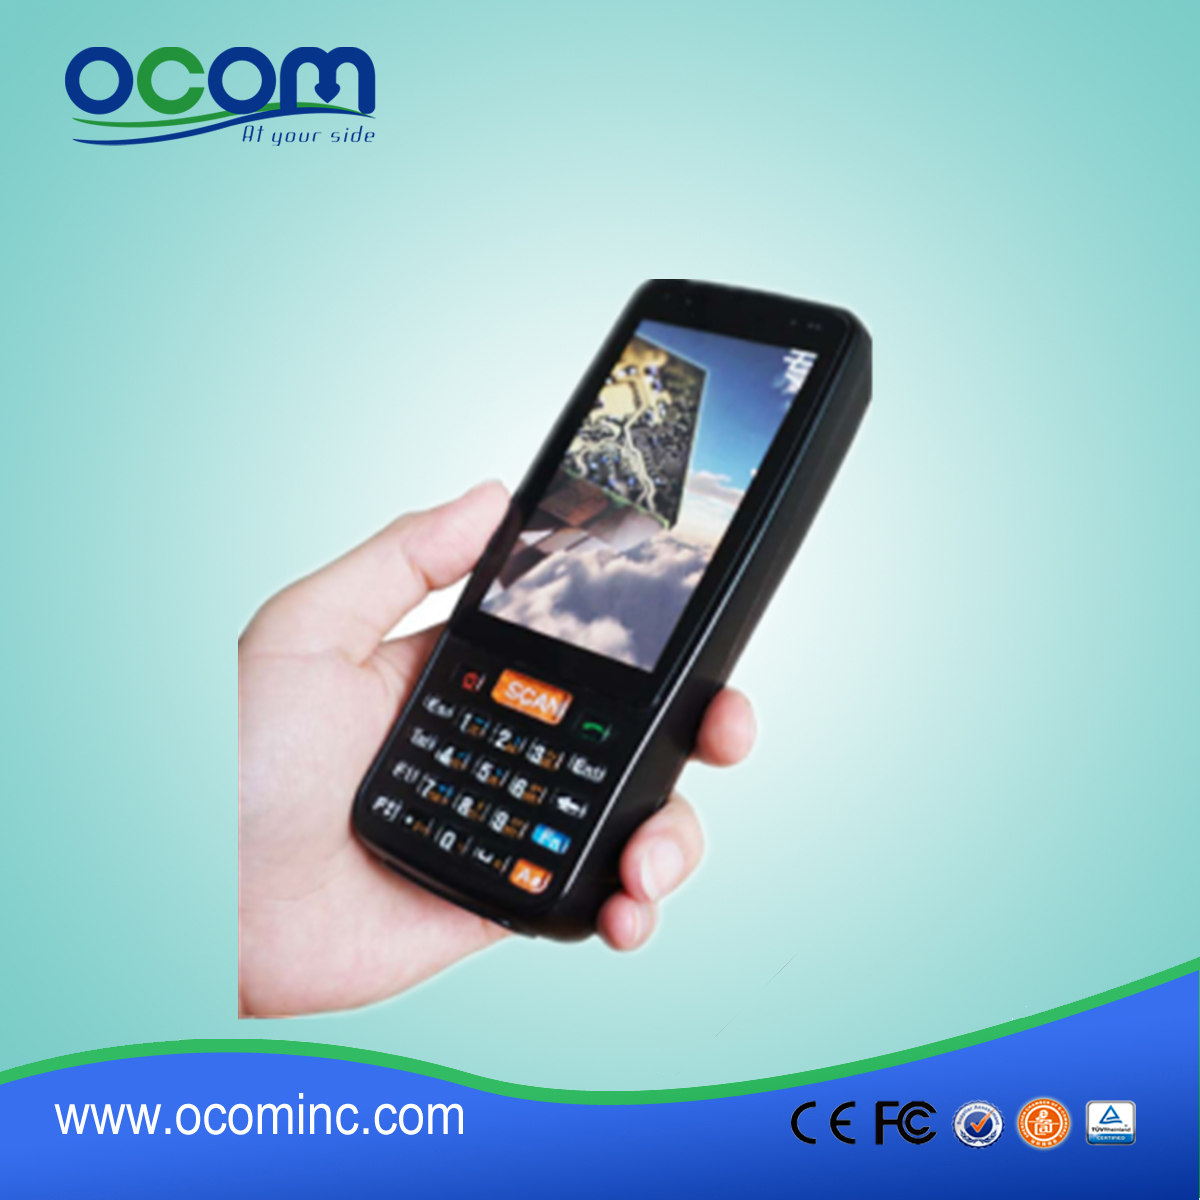 OCBS -D4000 PDA Android da 4 pollici con scanner 1D / 2D Opzionale